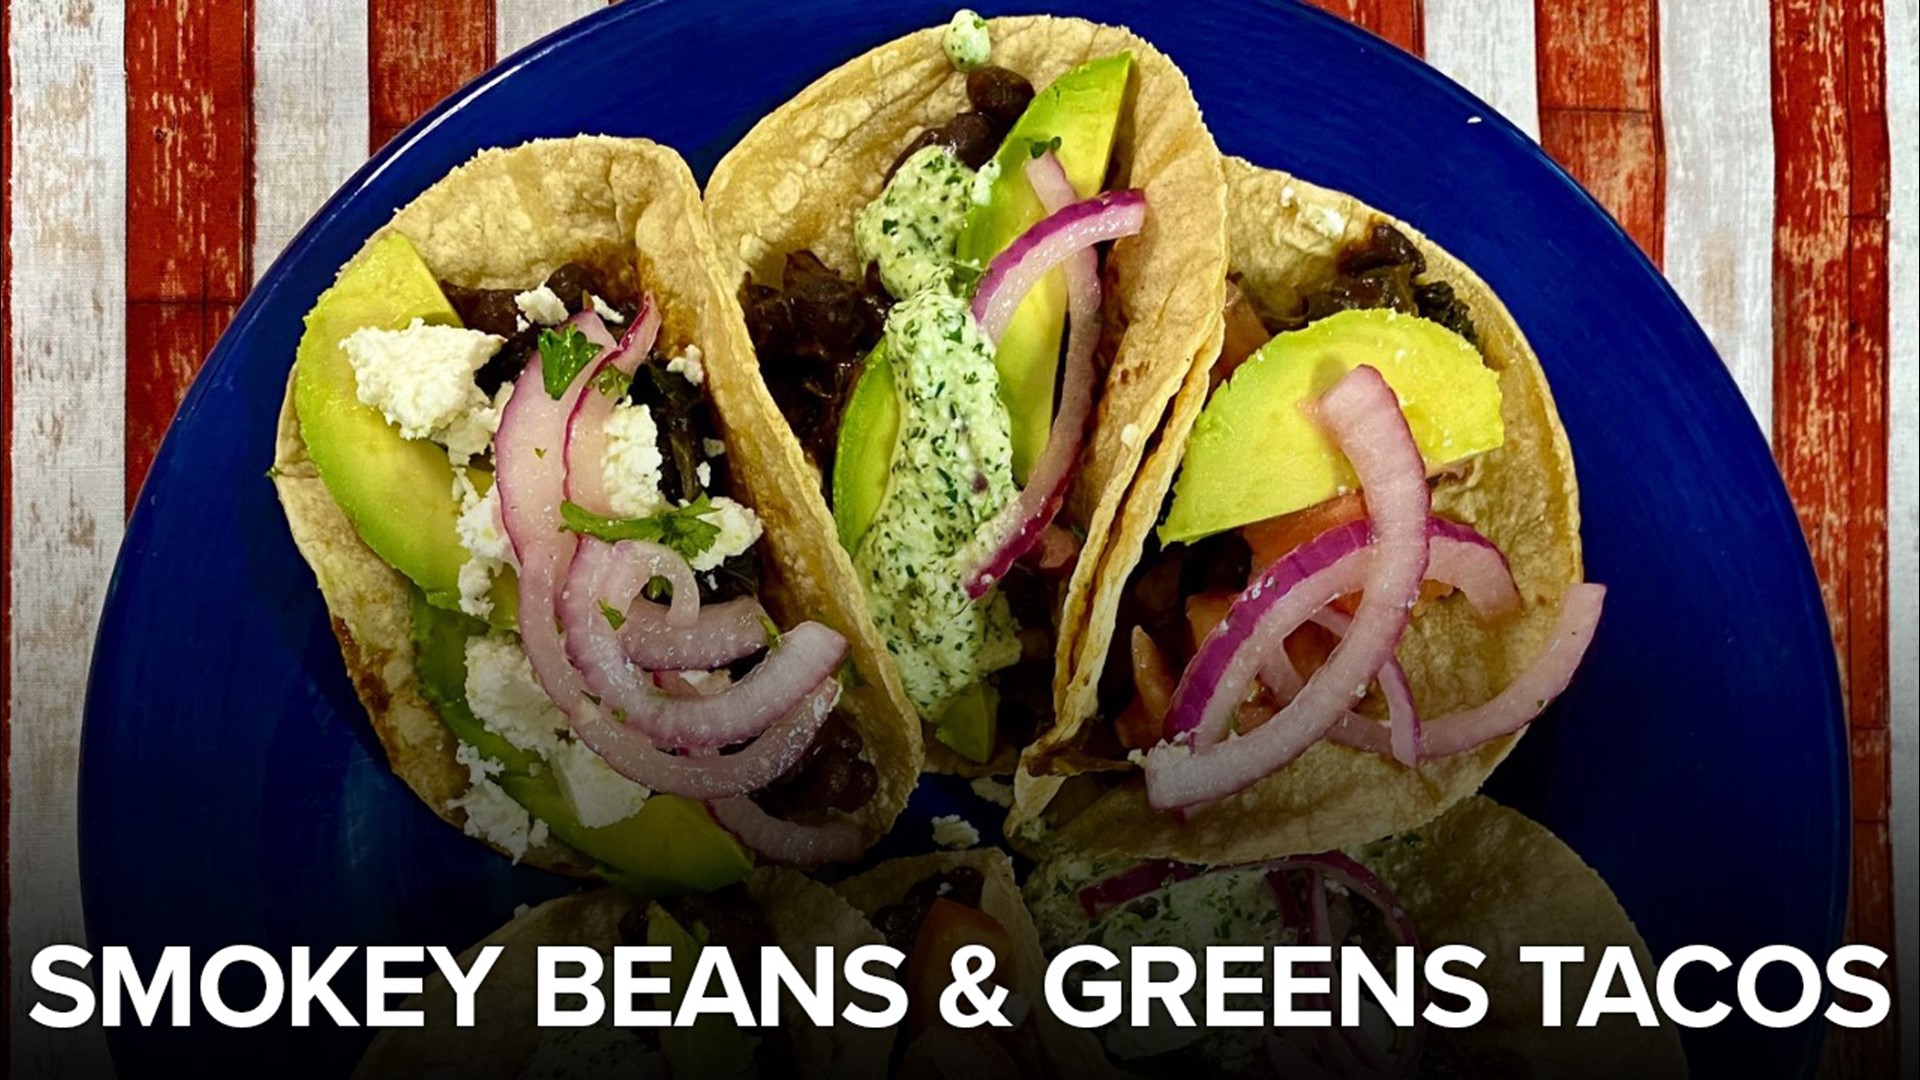 Today is National Eat Beans Day! So we're doing a smokey bean and kale taco served with Aji!